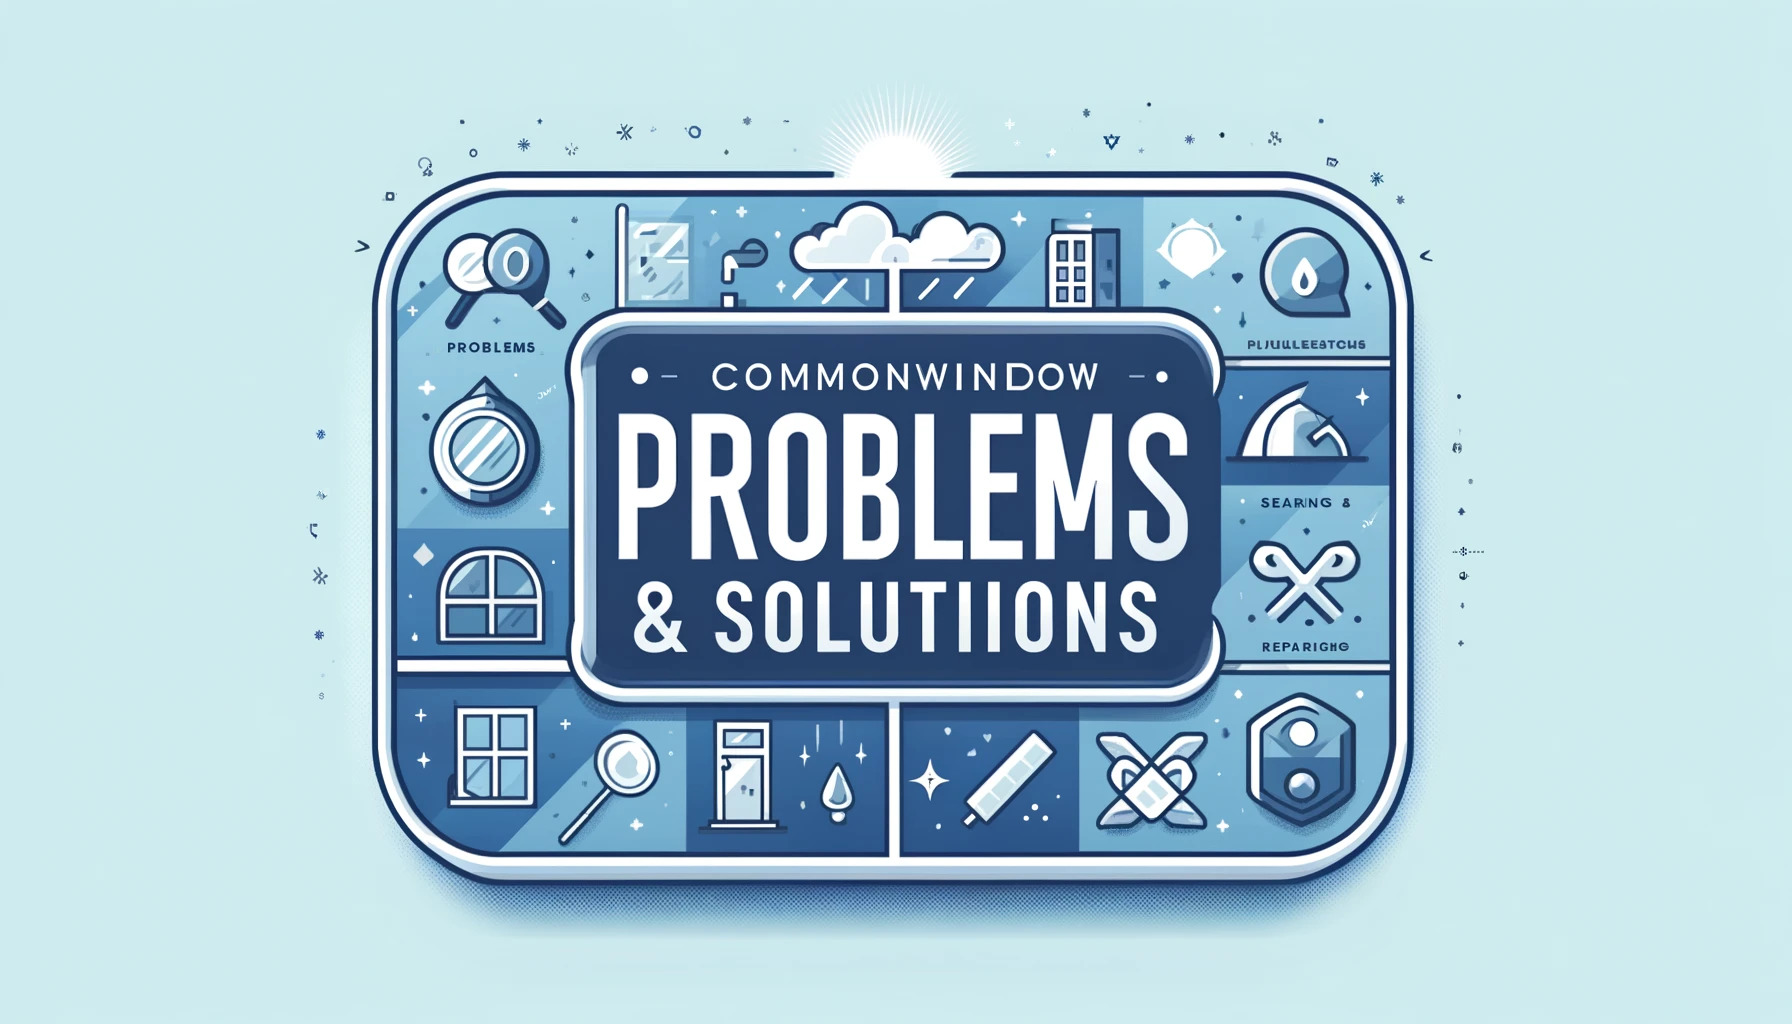 common window problems and solutions